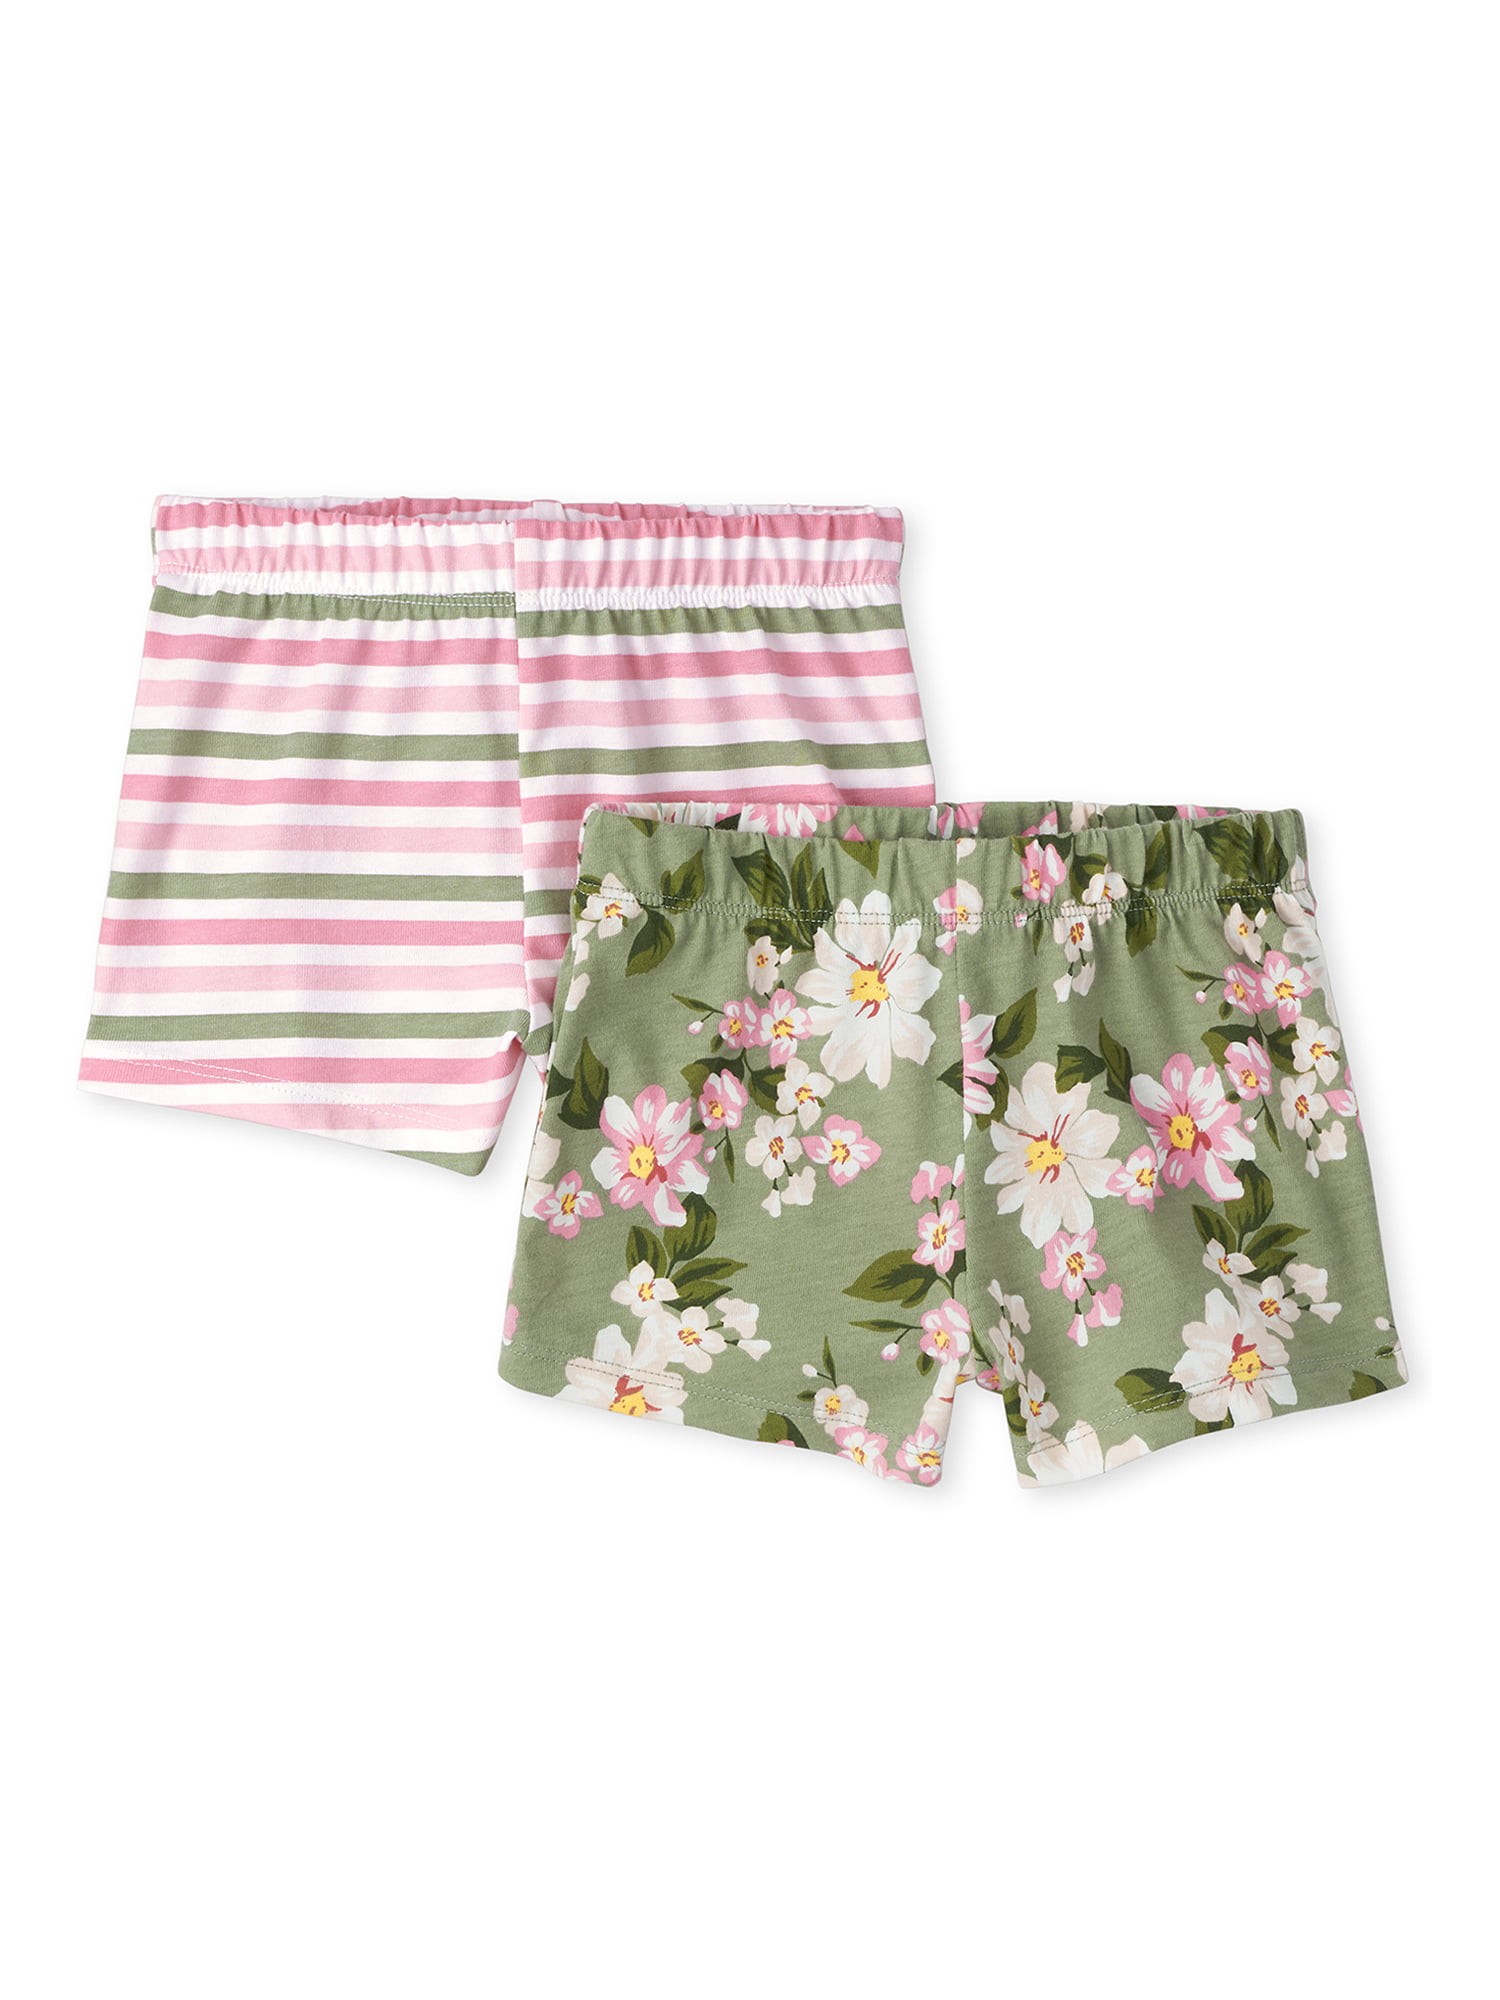 The Childrens Place Girls Printed Skorts Pack of Two 